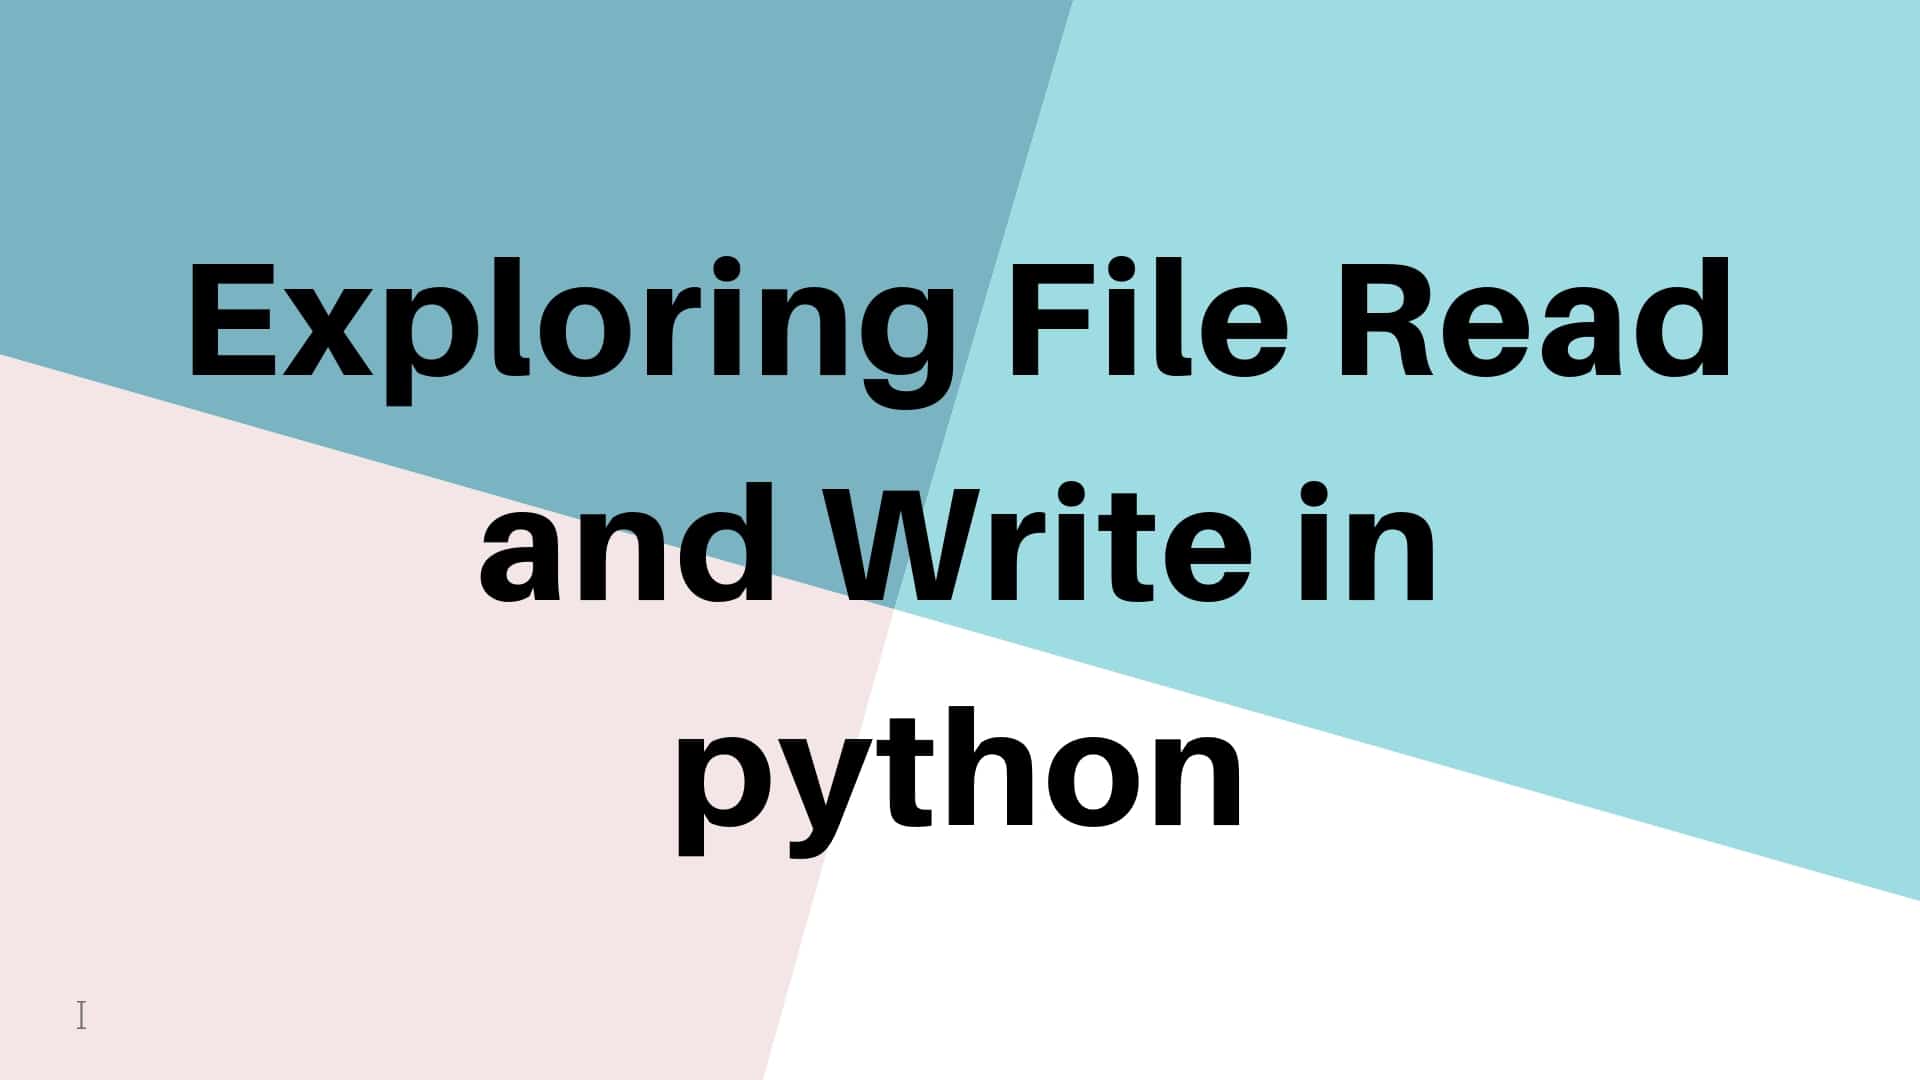 Exploring File read and write in python